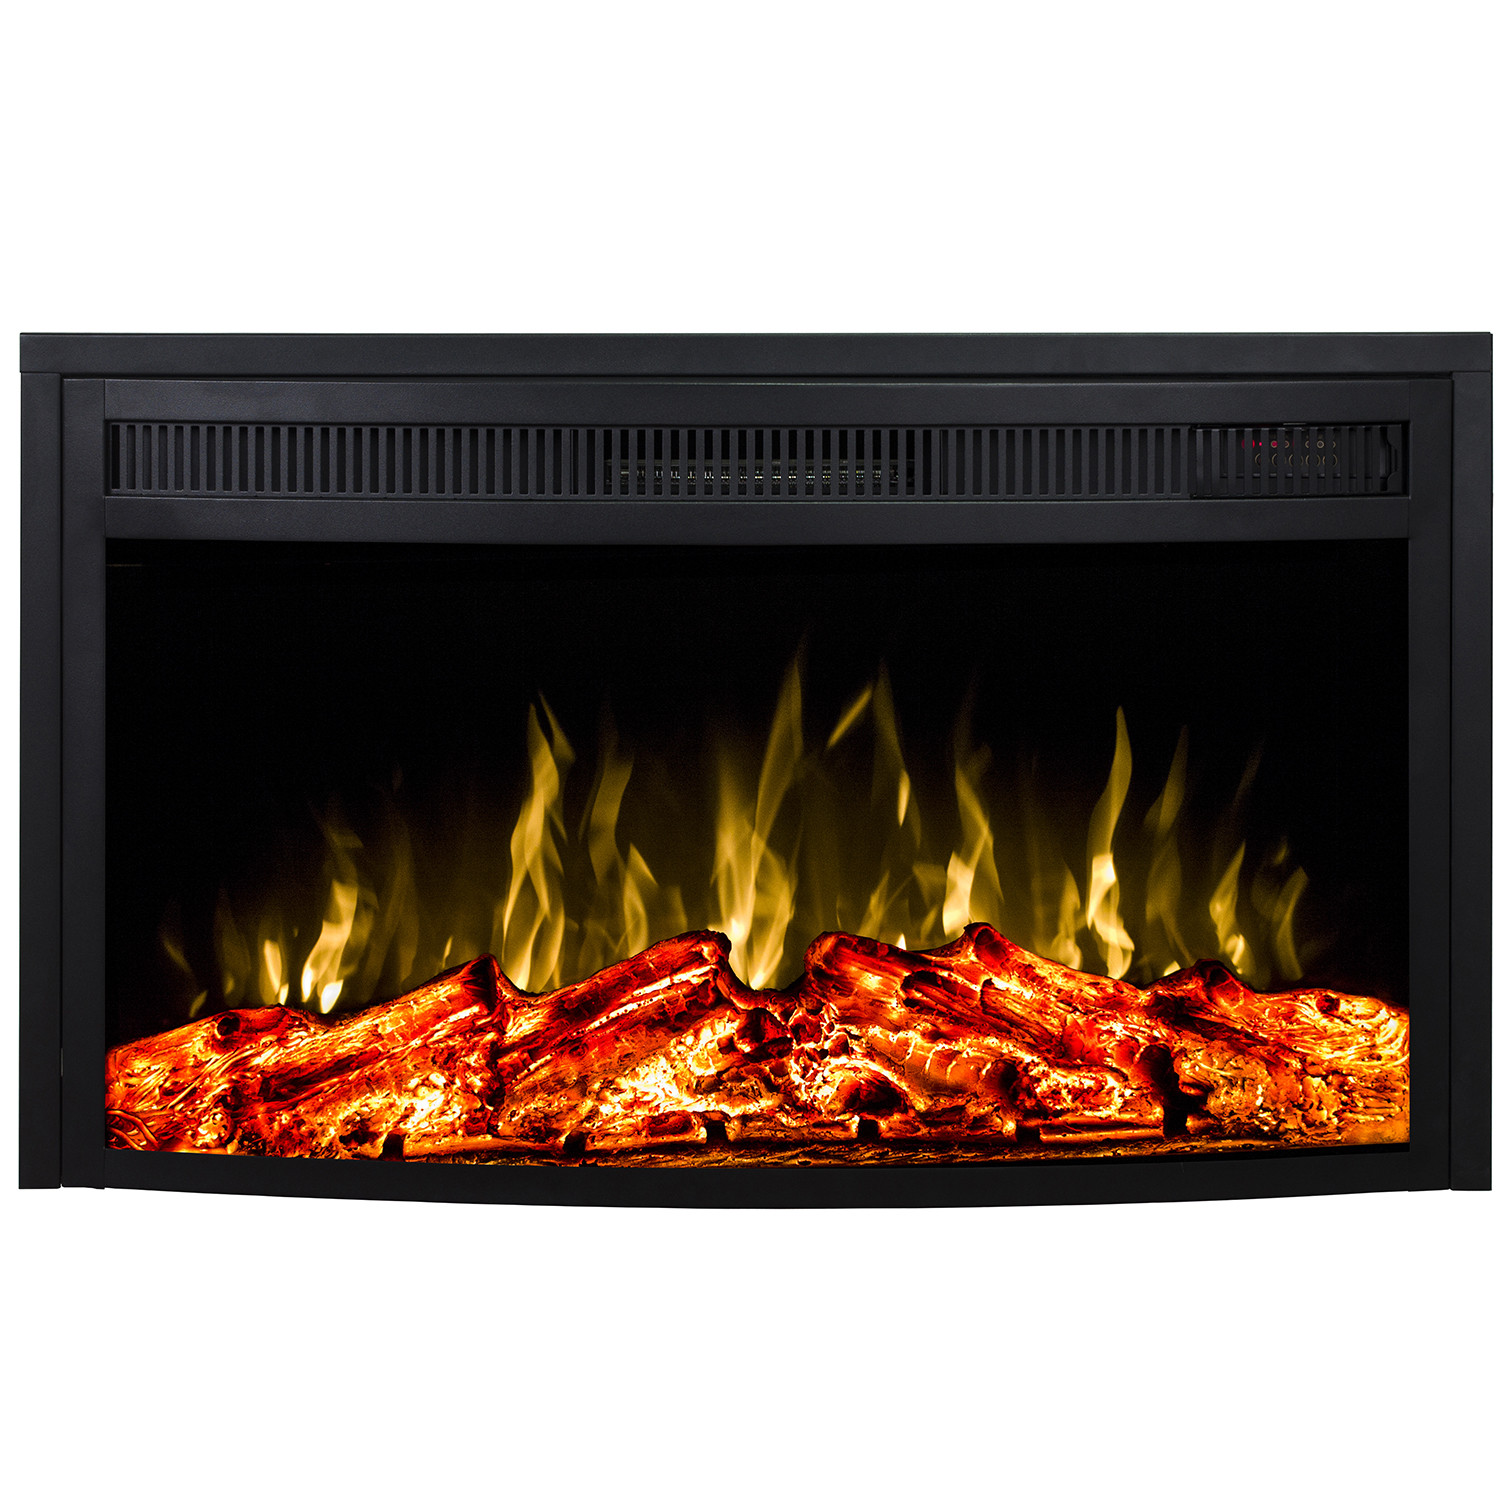 Electric Logs Fireplace Inserts
 33 Inch Curved Ventless Heater Electric Fireplace Insert